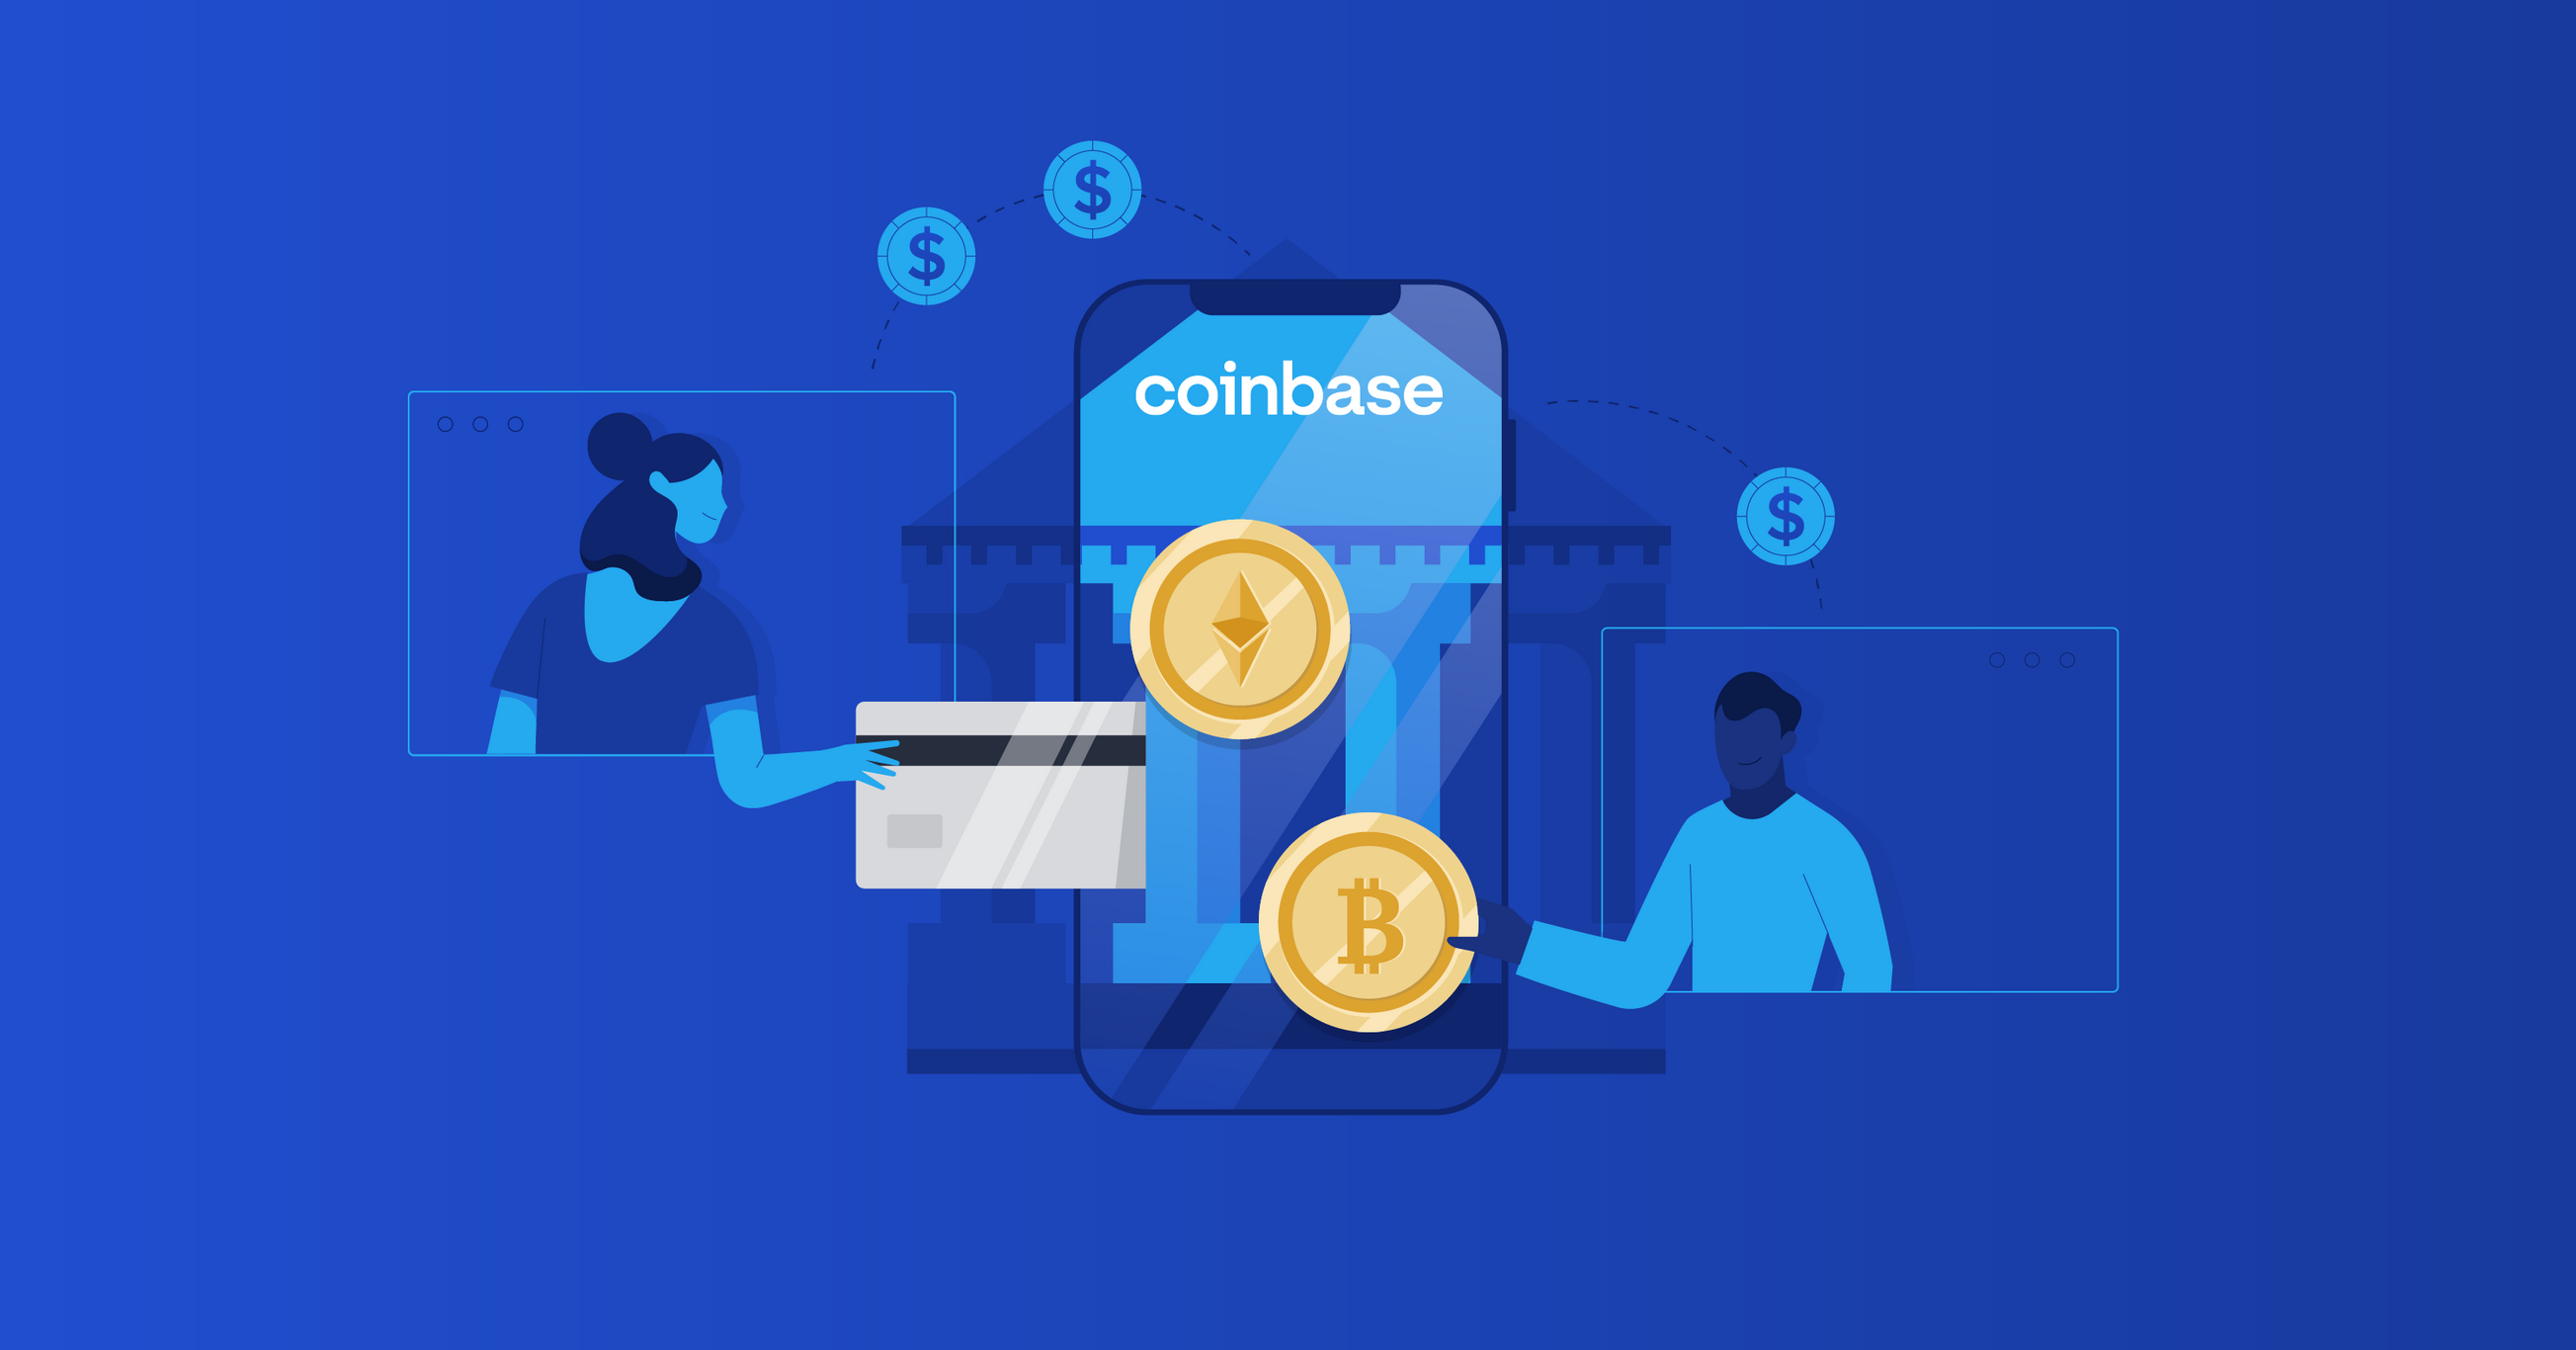 Despite its recent woes, many still consider Coinbase to be one of the most reputable crypto exchanges around.